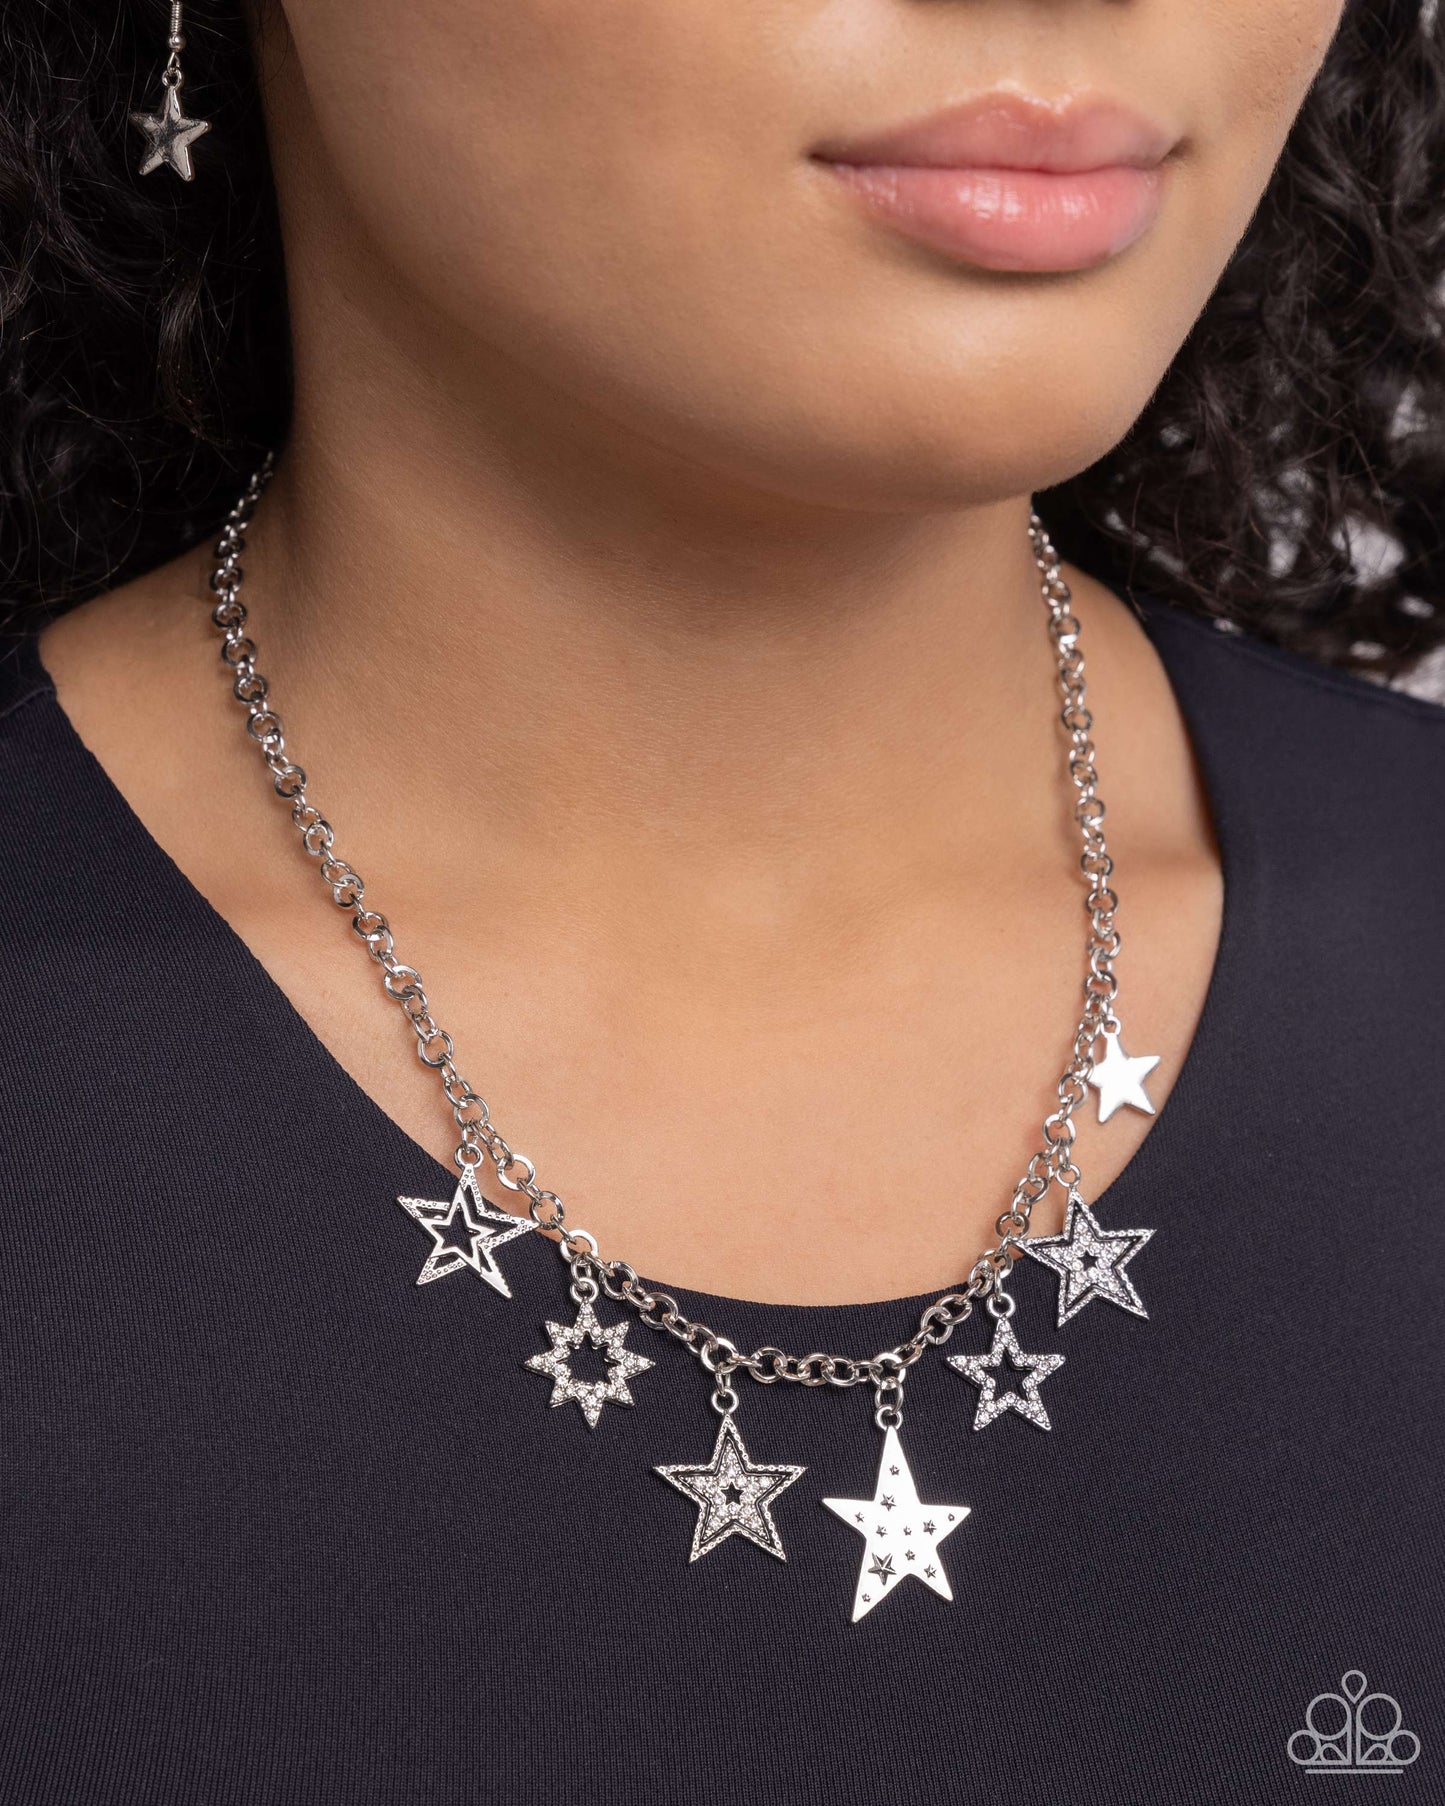 Starstruck Sentiment - Black and Silver Necklace - Paparazzi Accessories - Cascading from a classic silver chain, a collection of eclectic silver stars, some featuring white rhinestones, black-painted detailing, star-like texture, and layers, cascade around the neckline for a stellar statement.